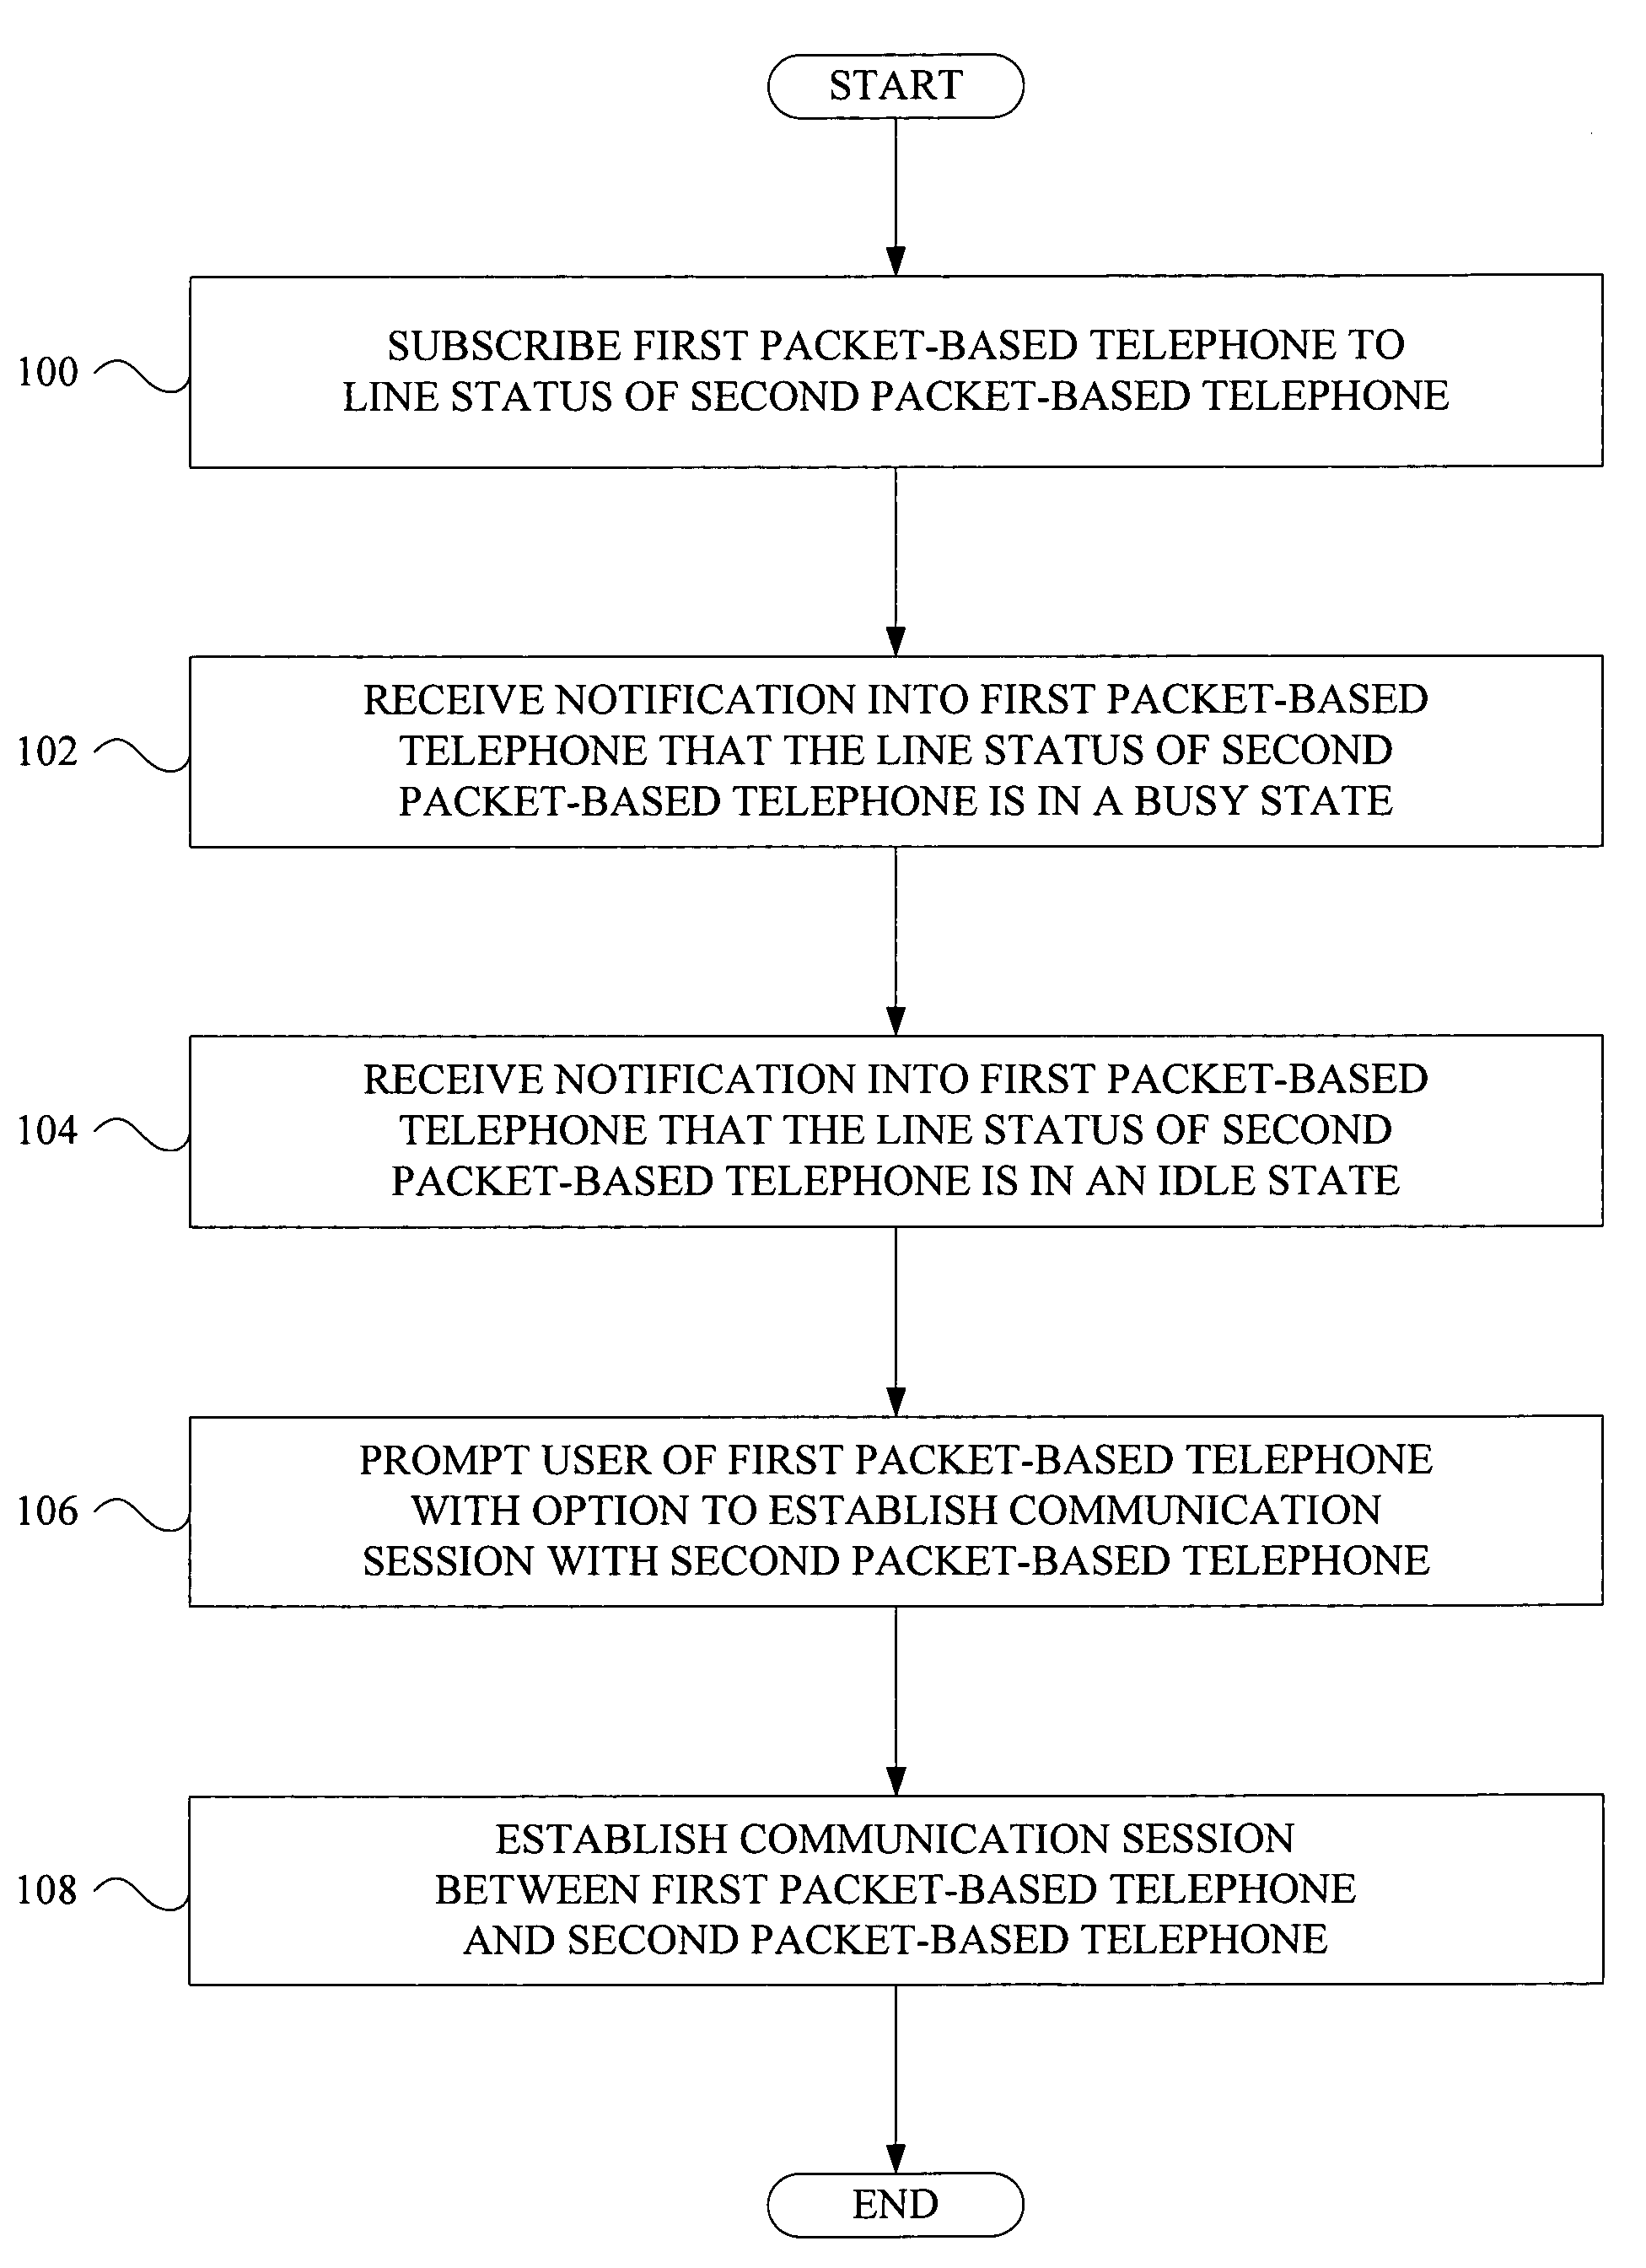 Method and apparatus for implementing a presence-based universal camp-on feature in packet-based telephony systems